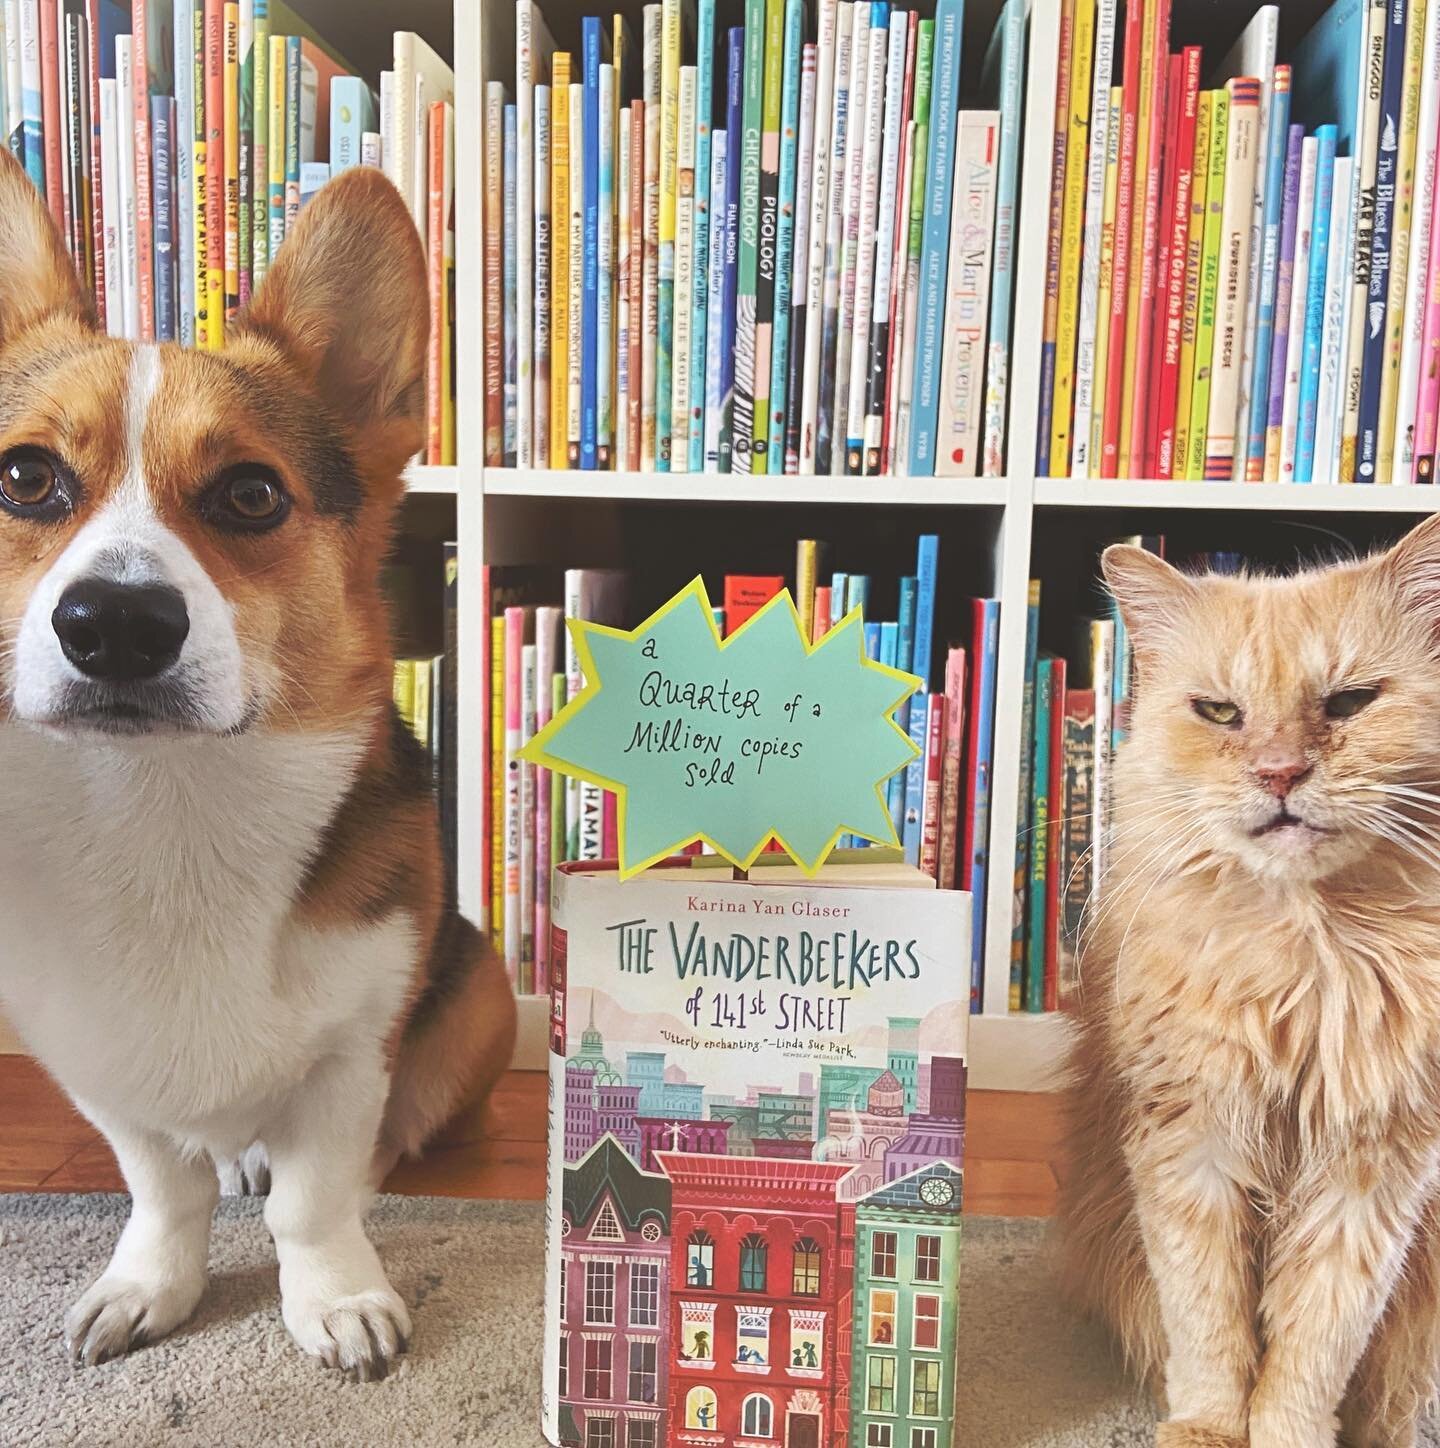 I learned something new today! The Vanderbeekers of 141st Street has sold over a quarter of a million copies! I am so grateful to everyone who has read and shared and reviewed and recommended this book. Thank you thank you thank you! ❤️💕✨ Also I kno